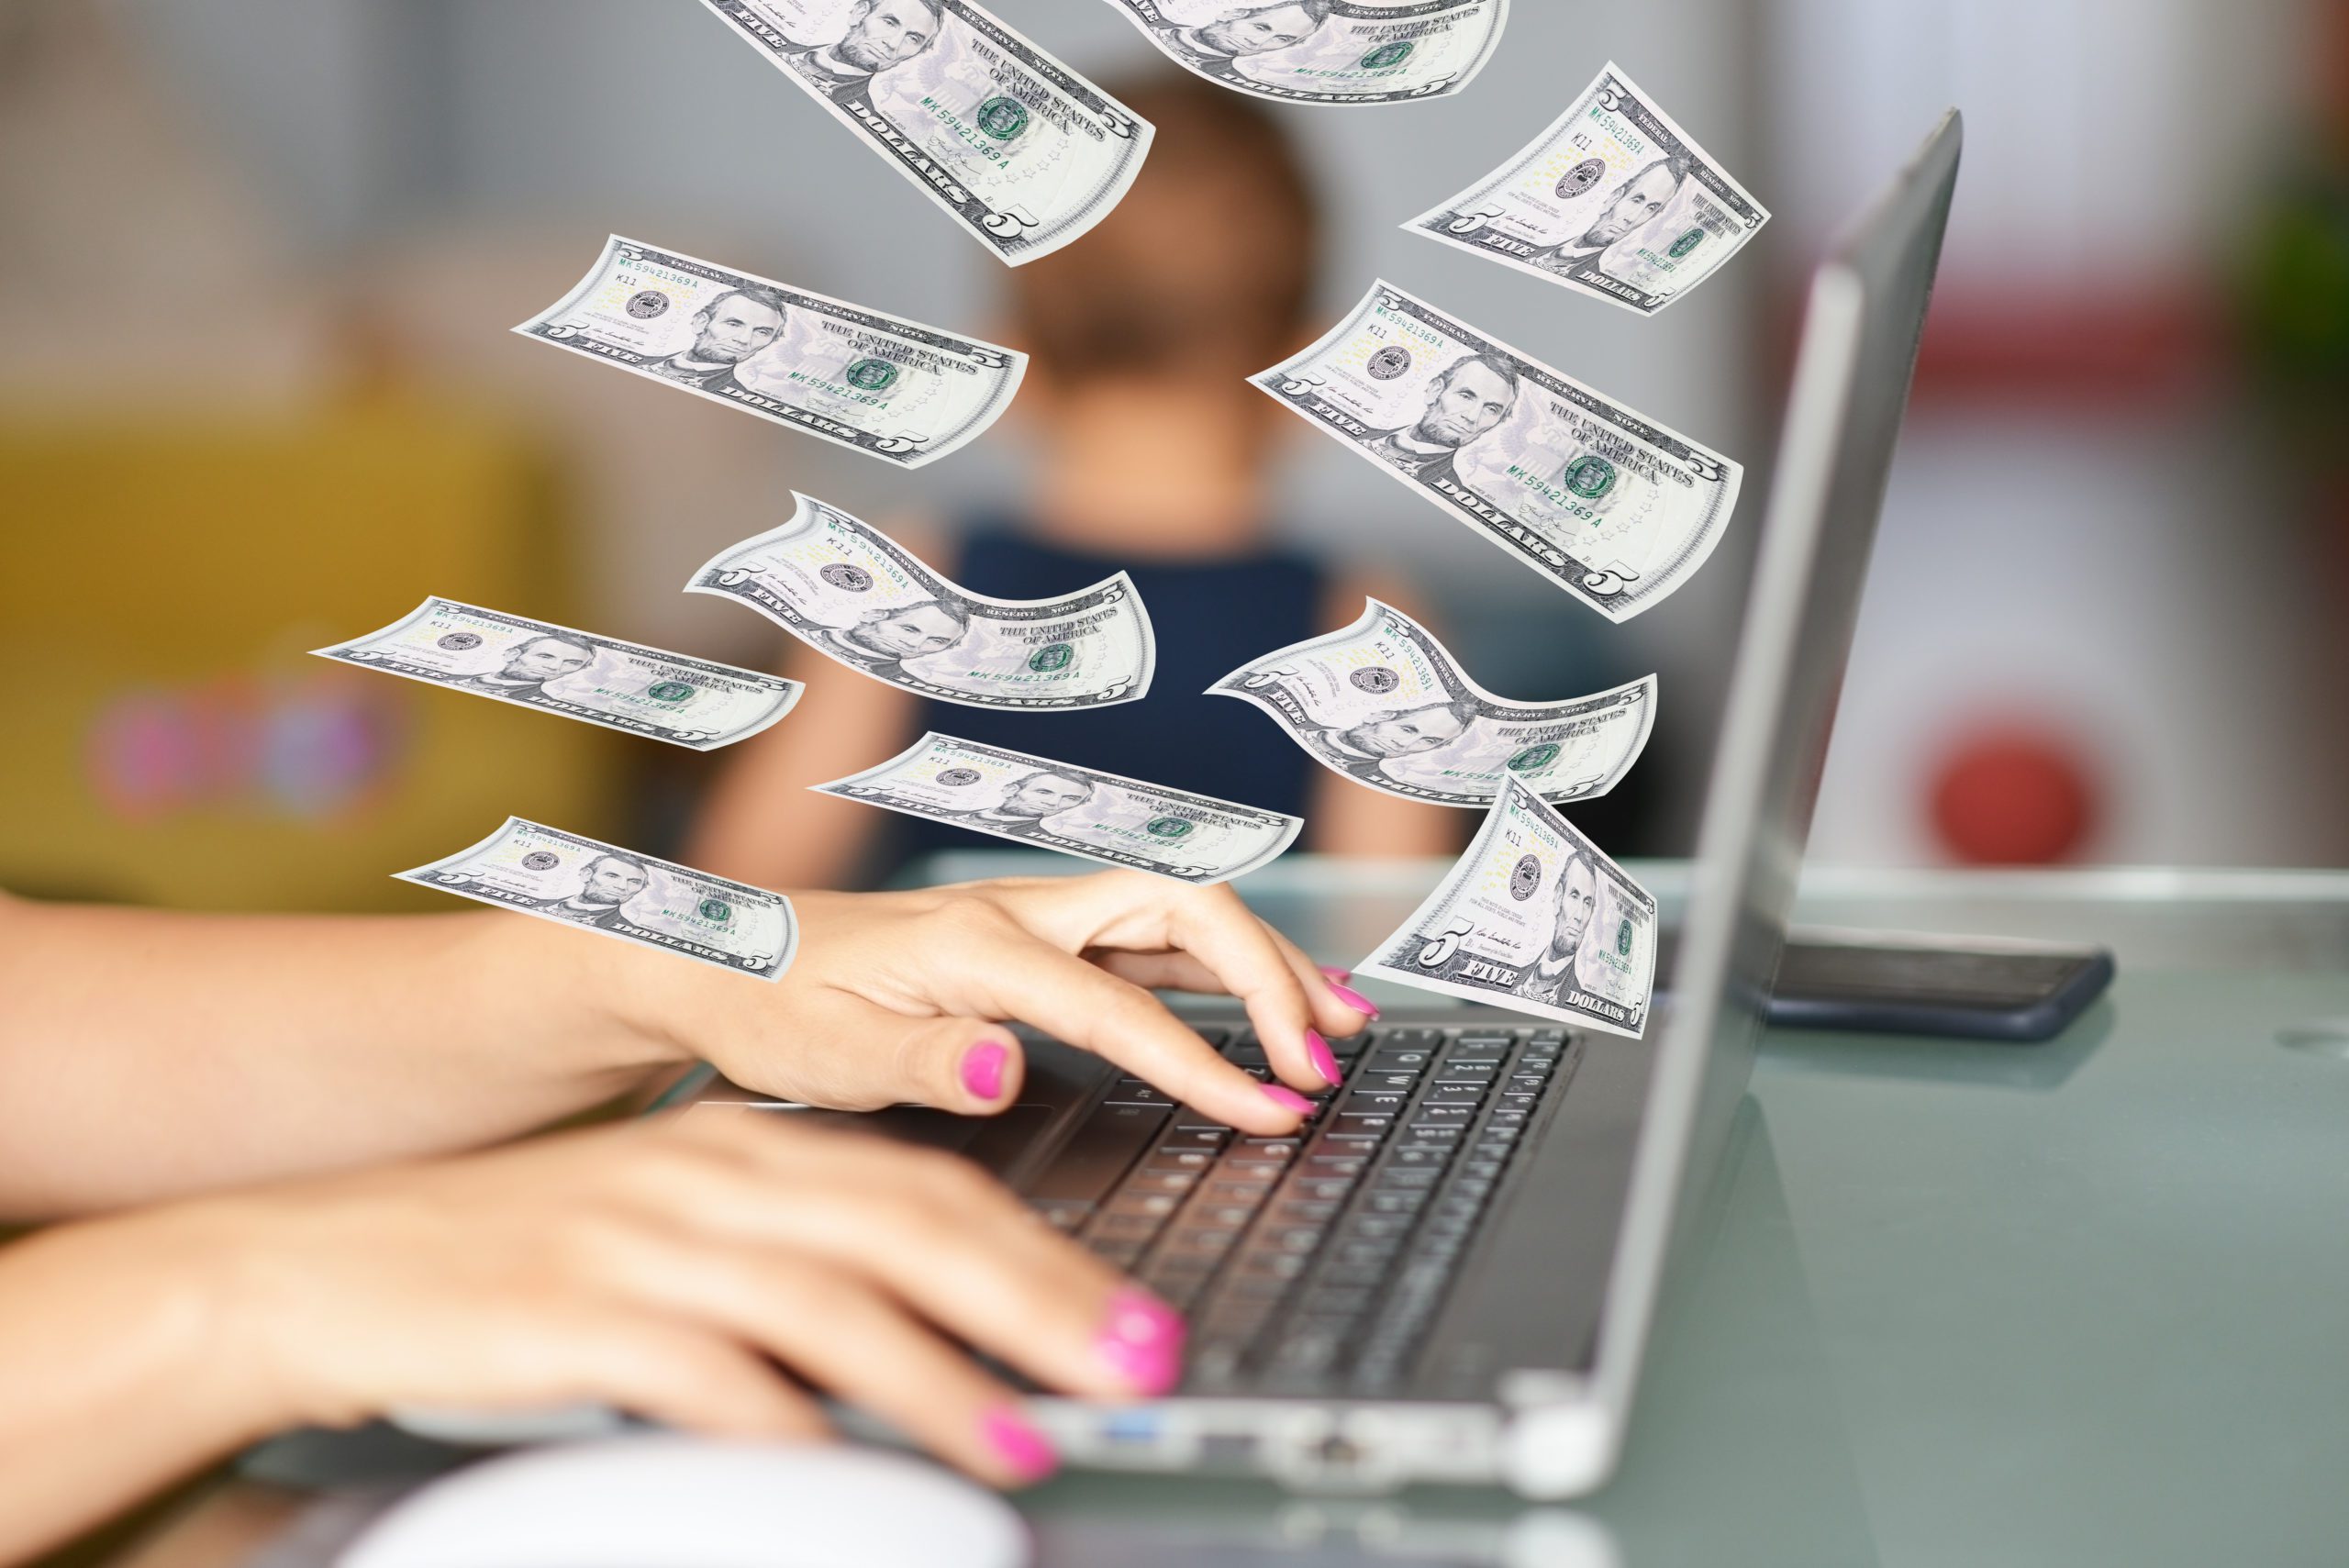 Work-from-home mom on her laptop with dollars flying around as her child plays in the background